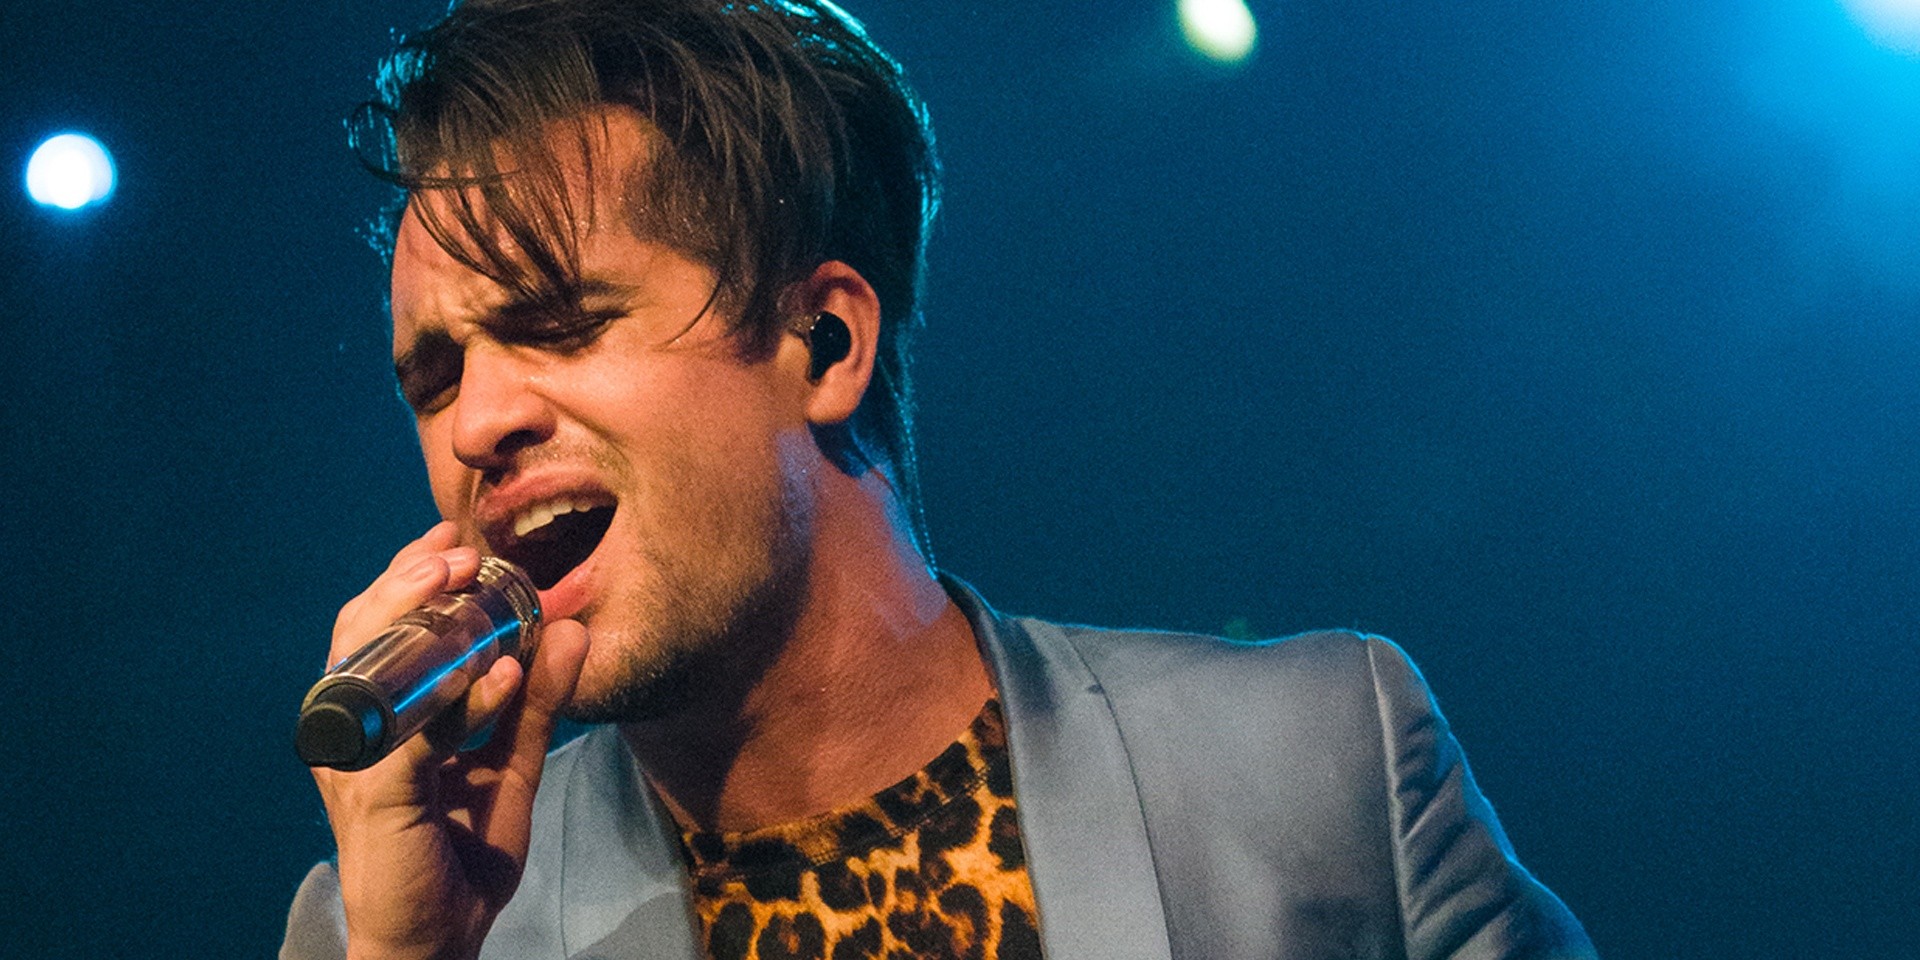 PHOTO GALLERY: Panic! At The Disco win over fans with sincere pop theatrics